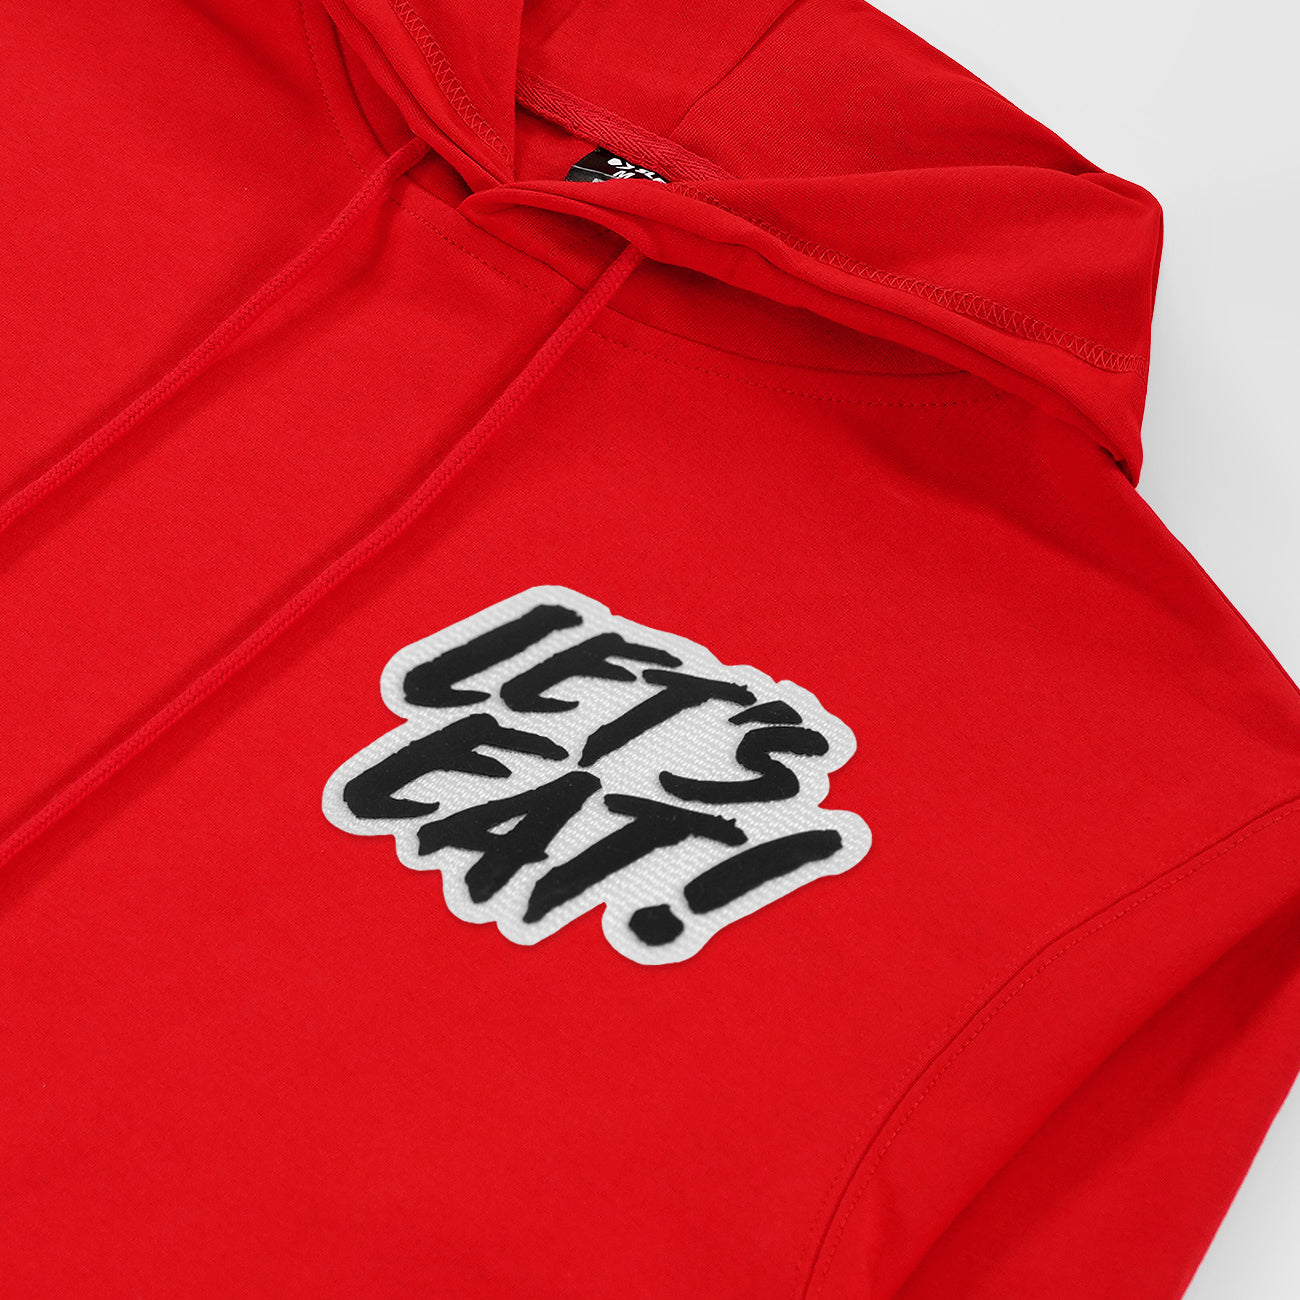 Let's Eat Patch Hoodie